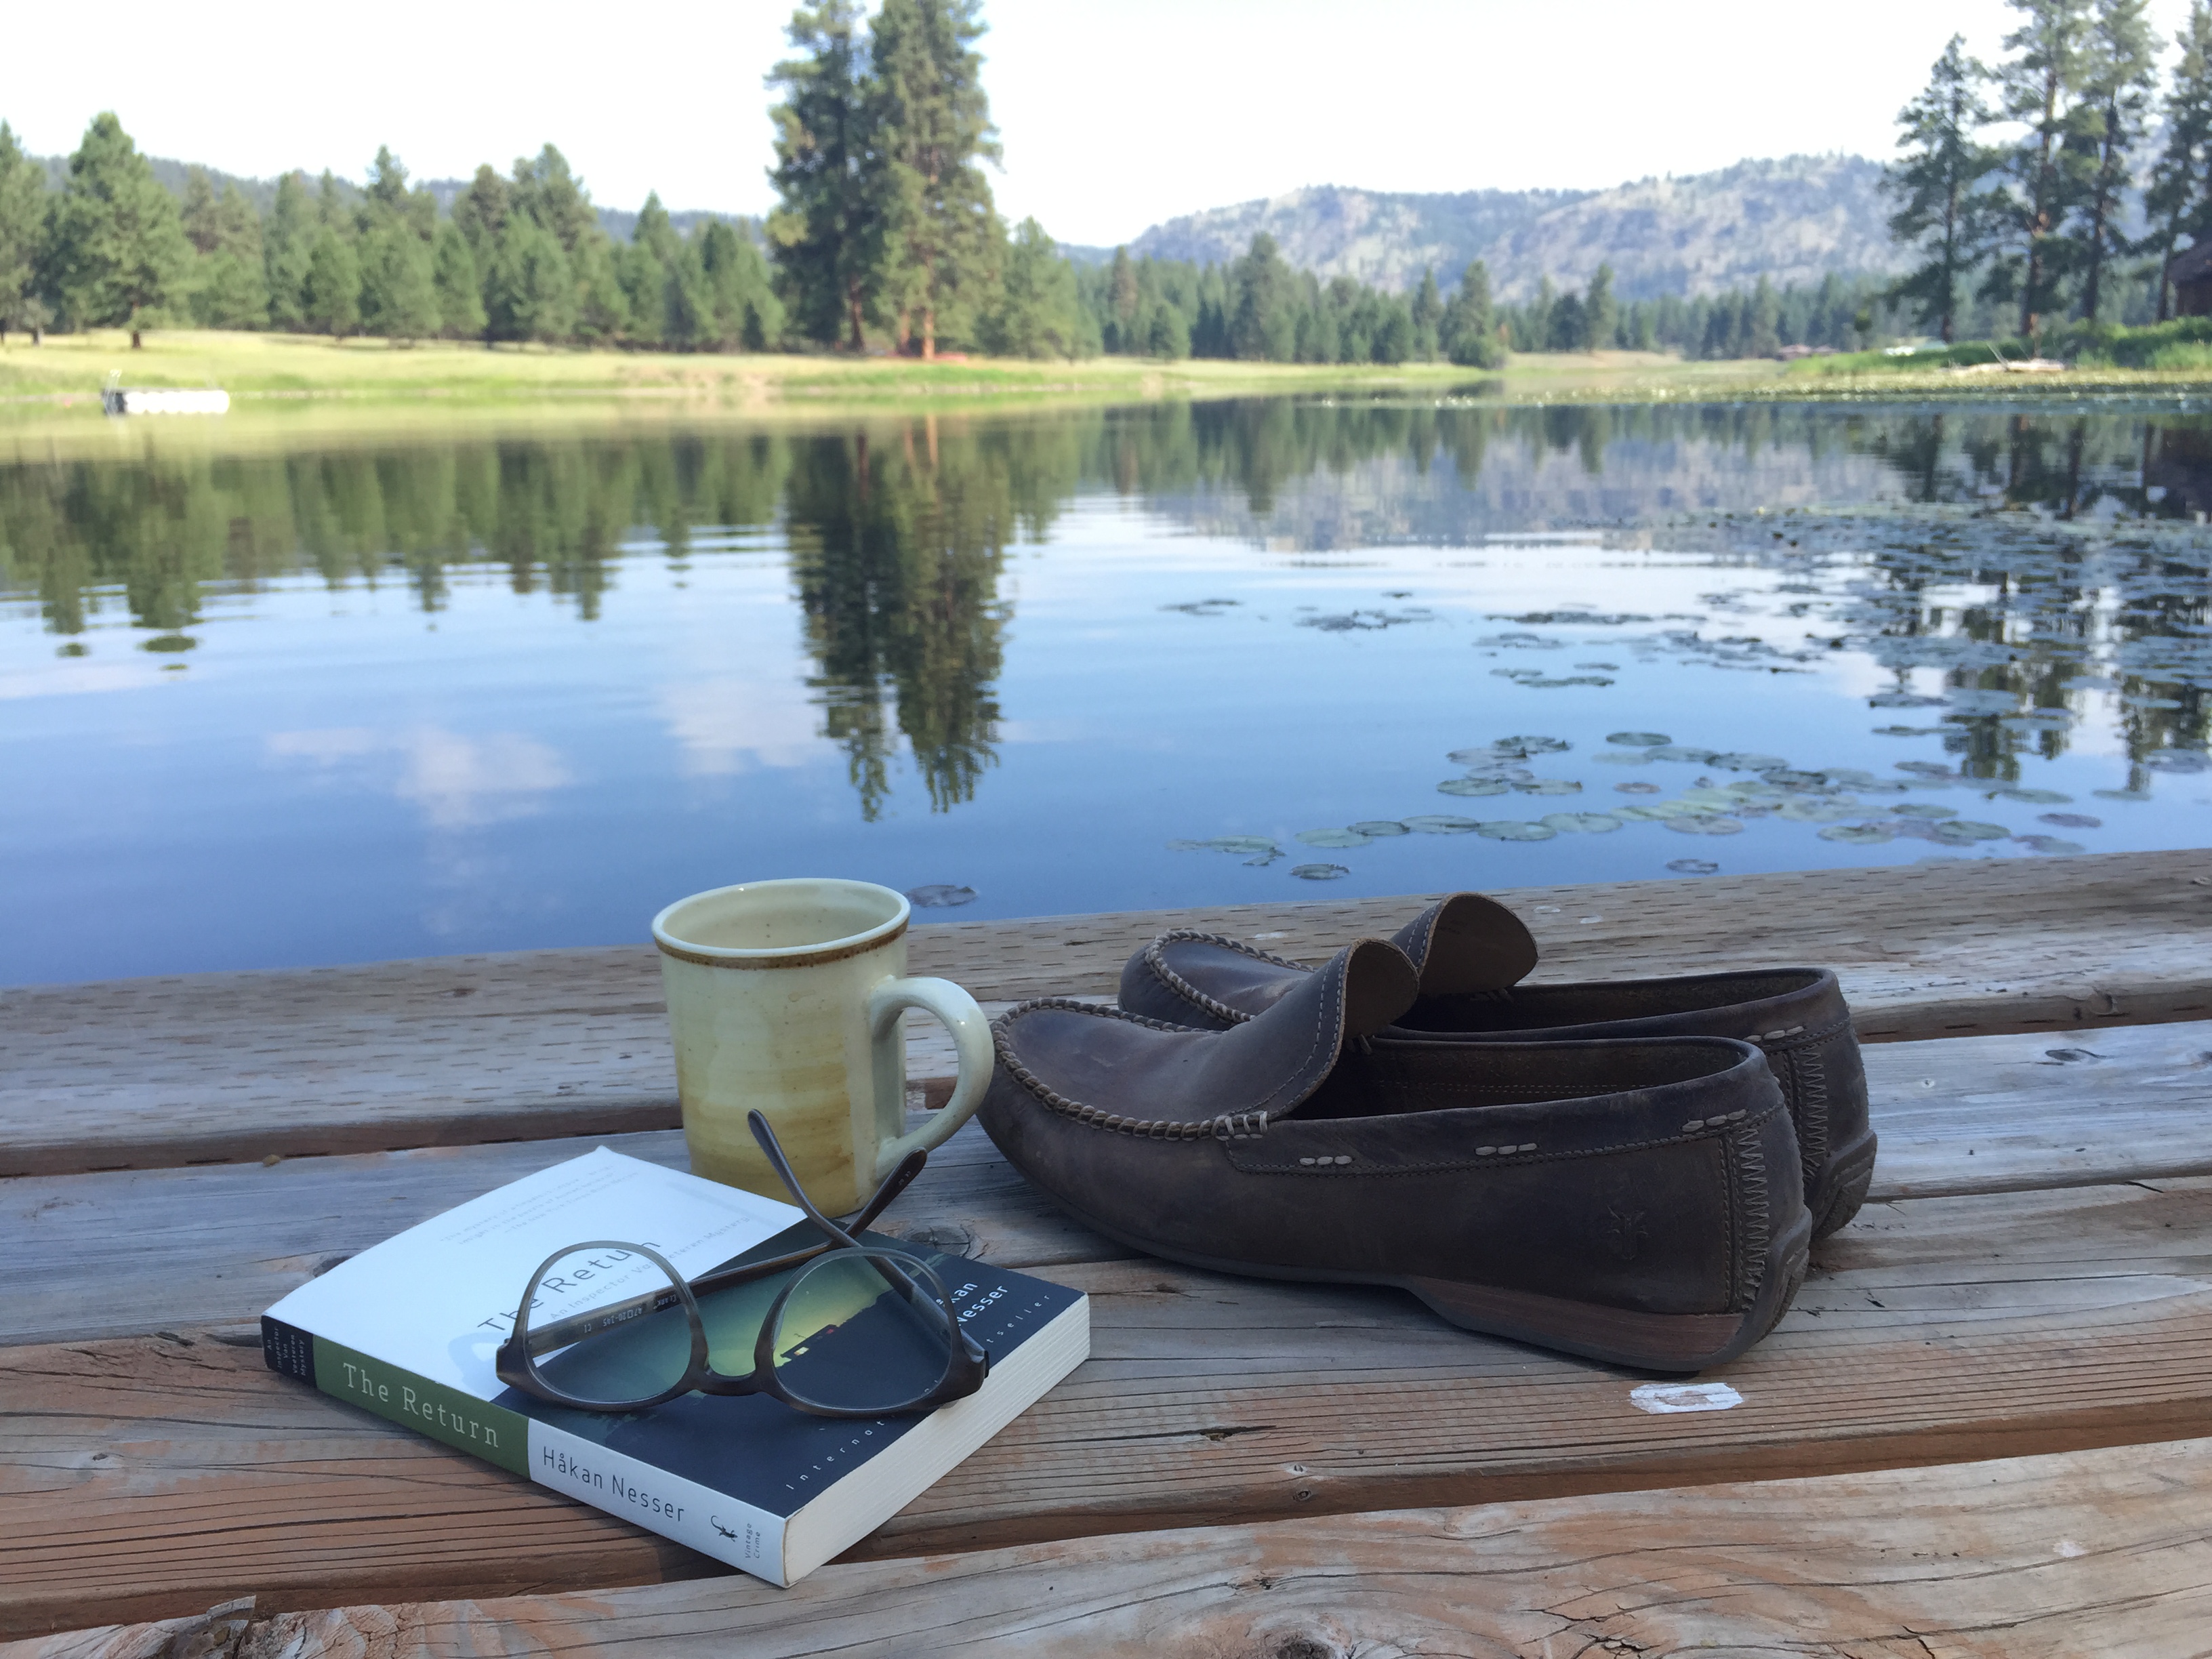 Summer Reading 2015: A good book, glasses, shoes and a dock on an isolated lake in Montana.